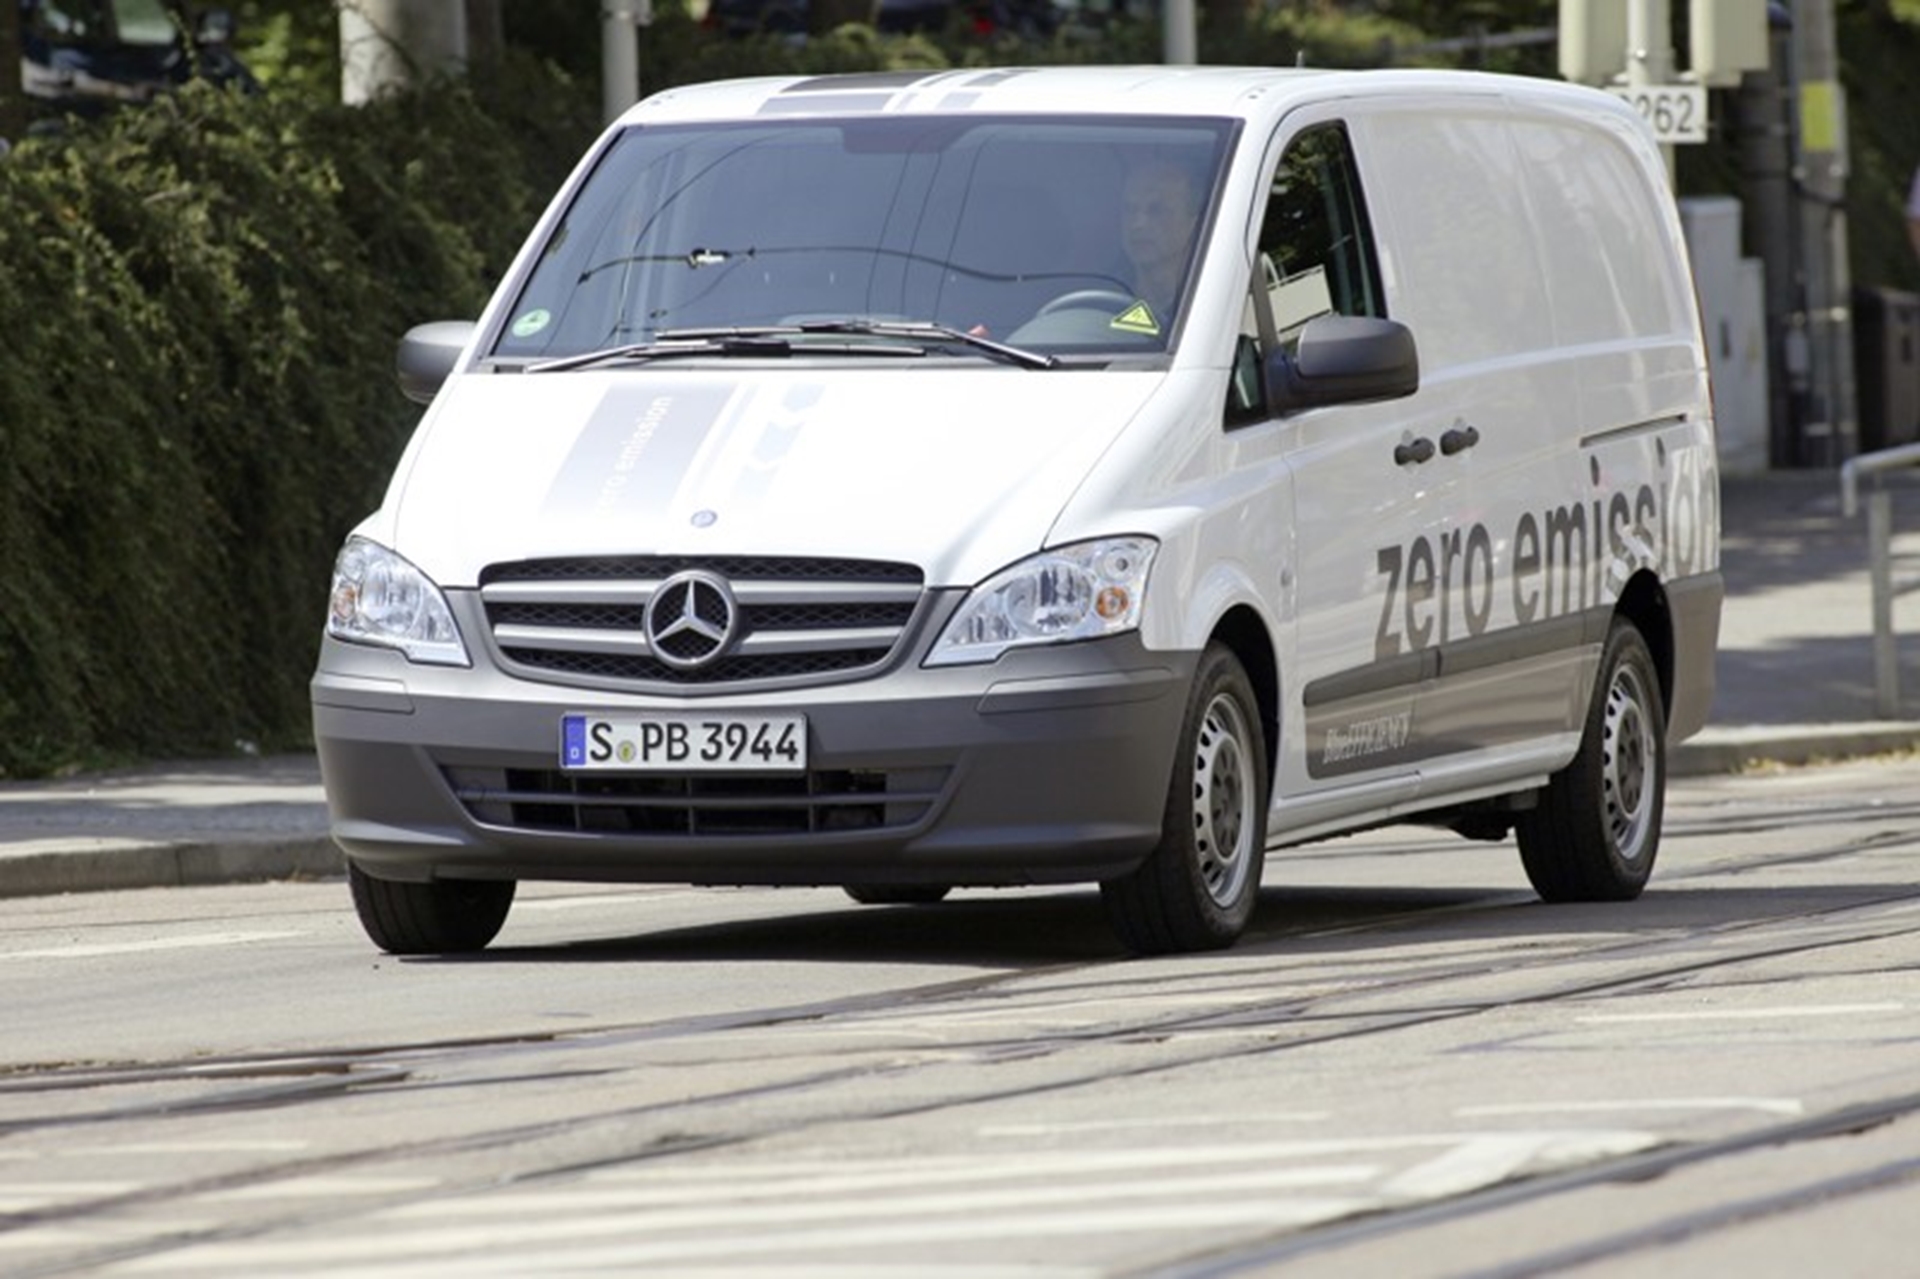 Quiet and emissions-free driving in the city: Vito E-Cell vans cover 650,000 km in customer use